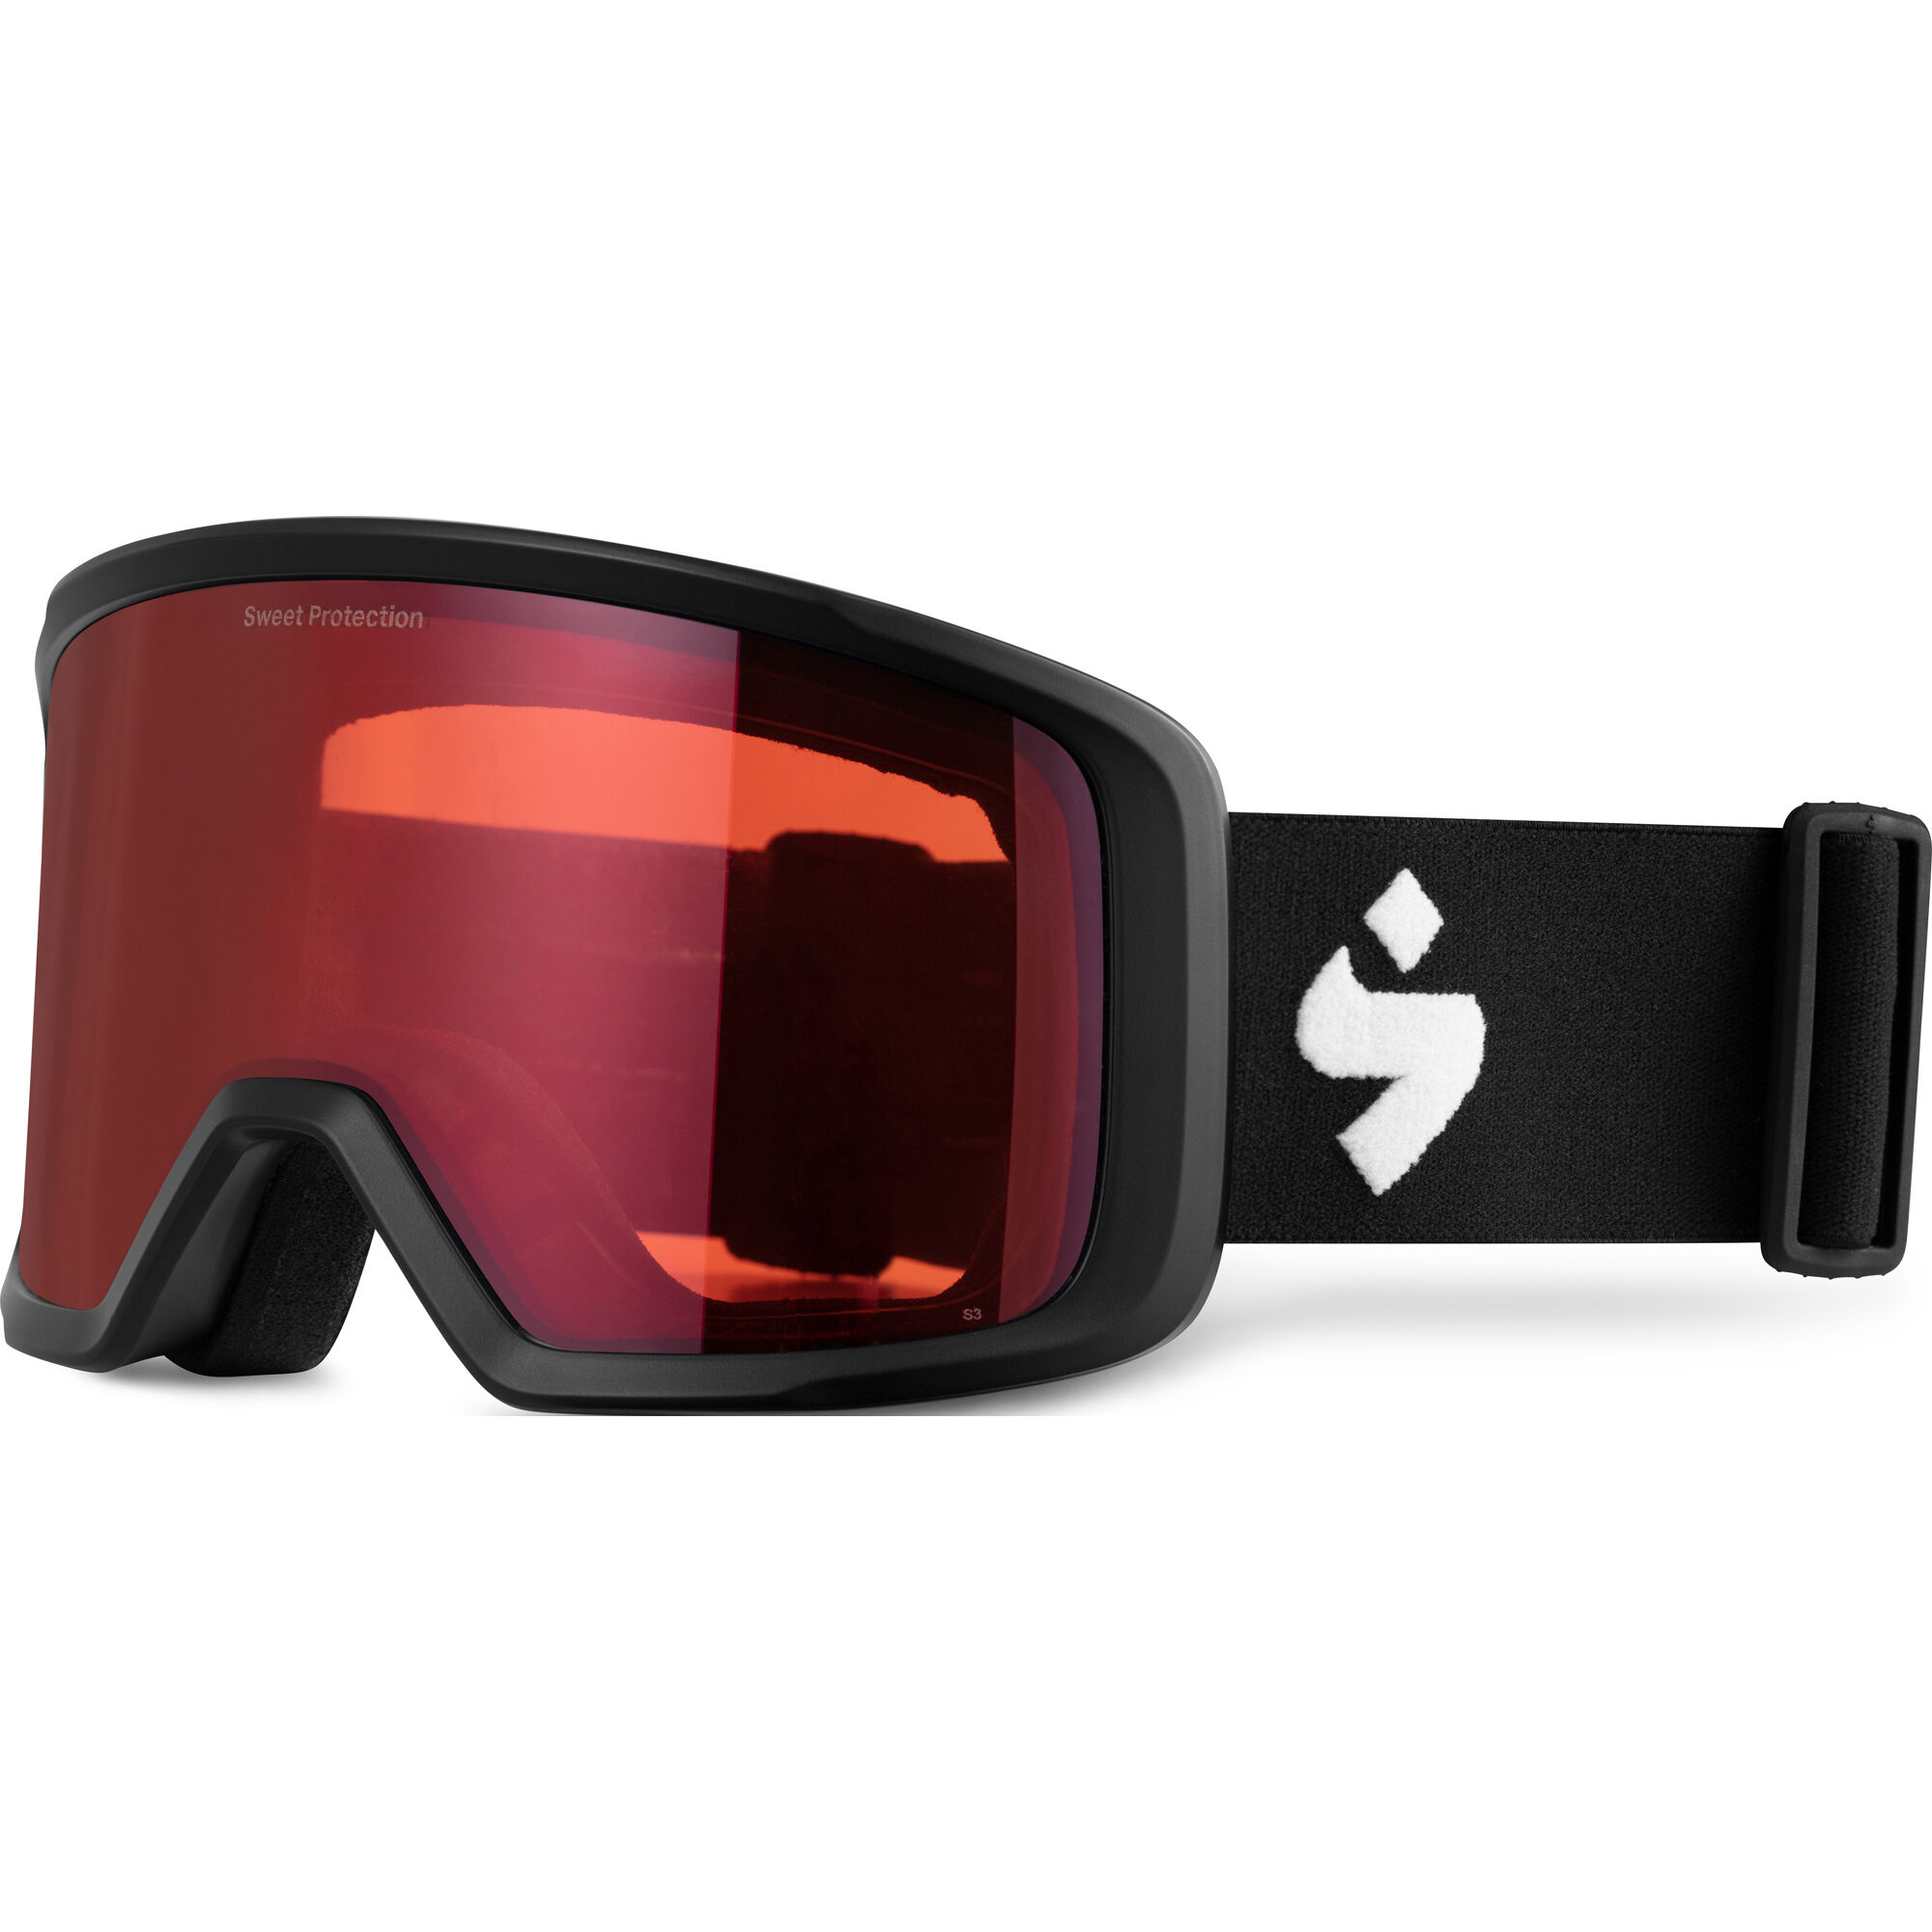 Sweet Protection Firewall Matte Black / Satin Ruby Goggle 850034-SWRB-MBLK 2019